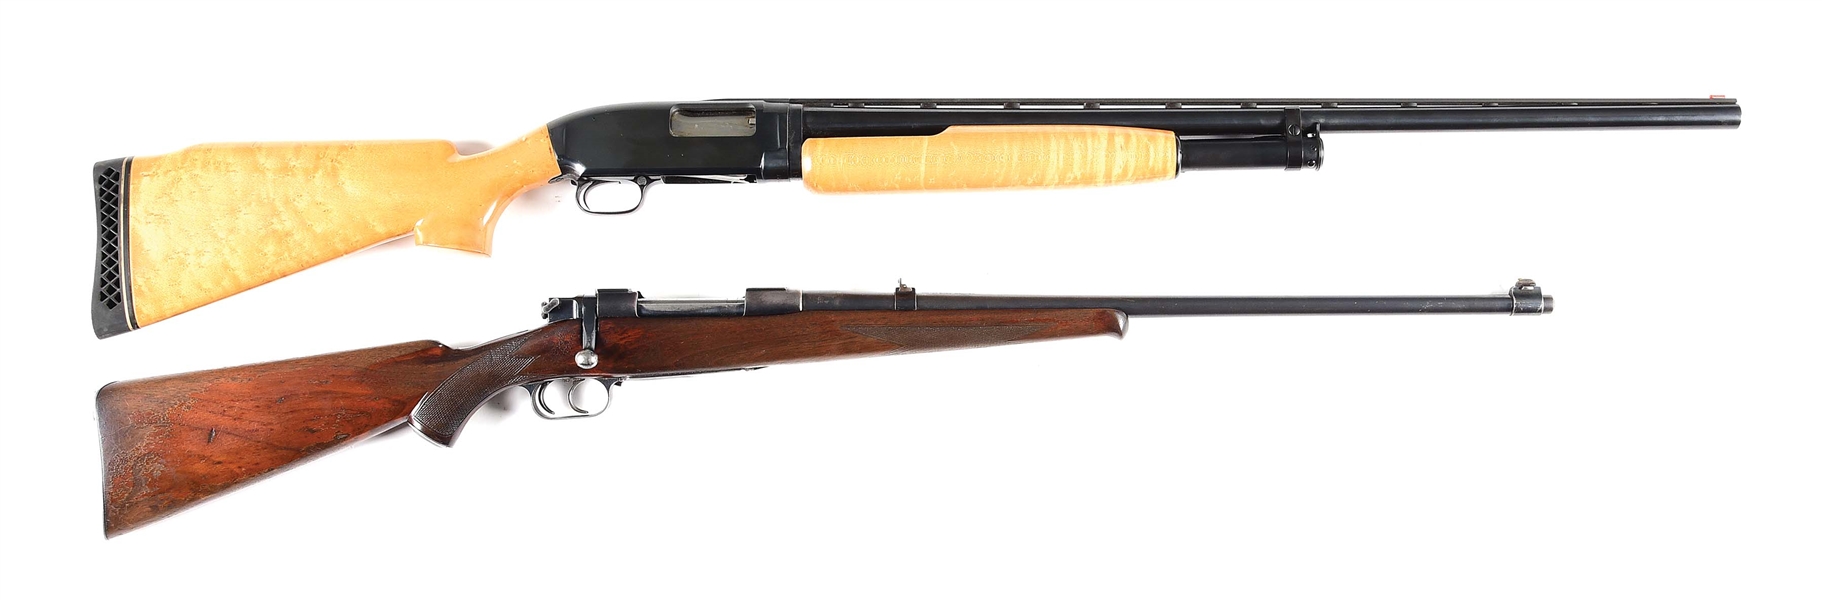 (M) LOT OF TWO: WINCHESTER MODEL 12 SLIDE ACTION SHOTGUN TOGETHER WITH A NEWTON HIGH POWER RIFLE.